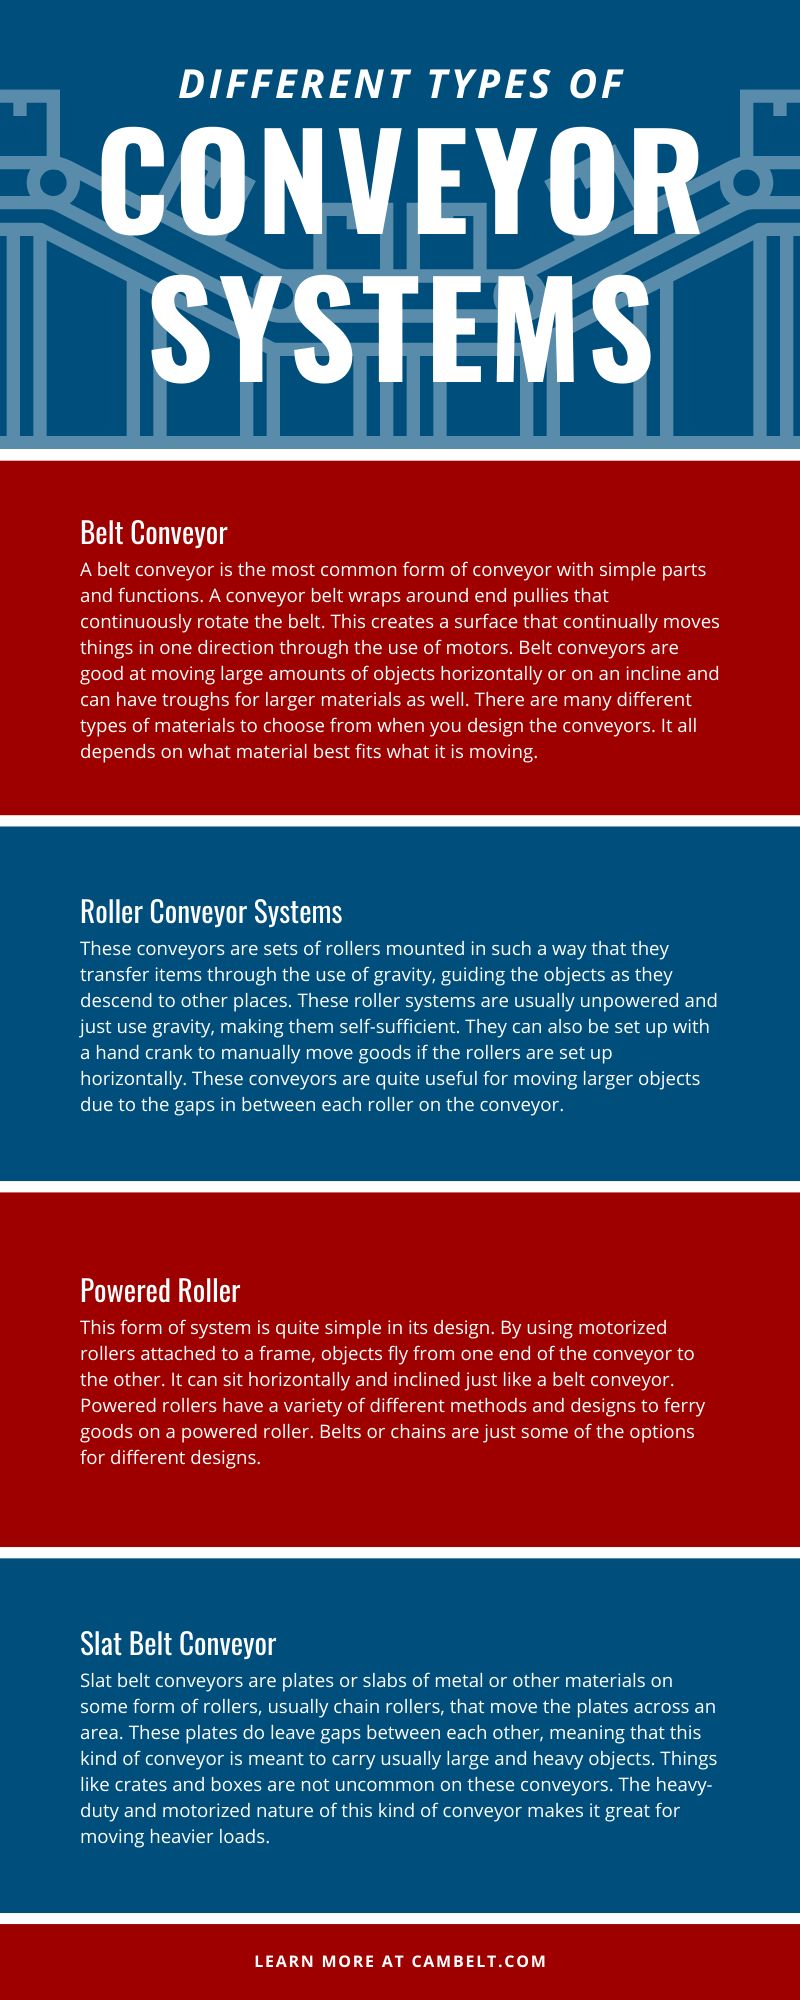 Different Types of Conveyor Systems